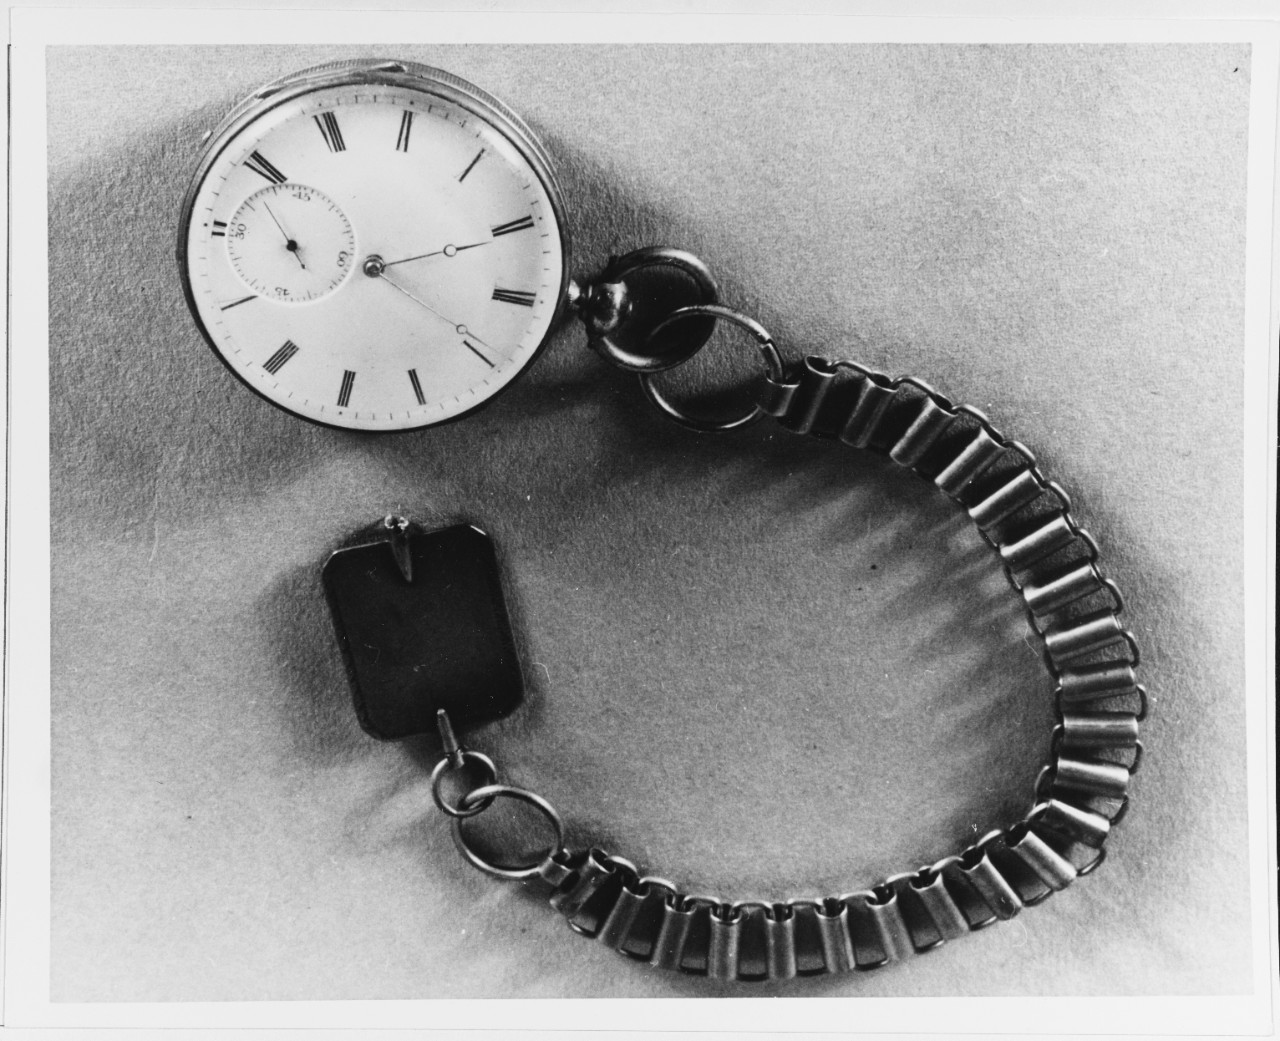 Watch and Chain